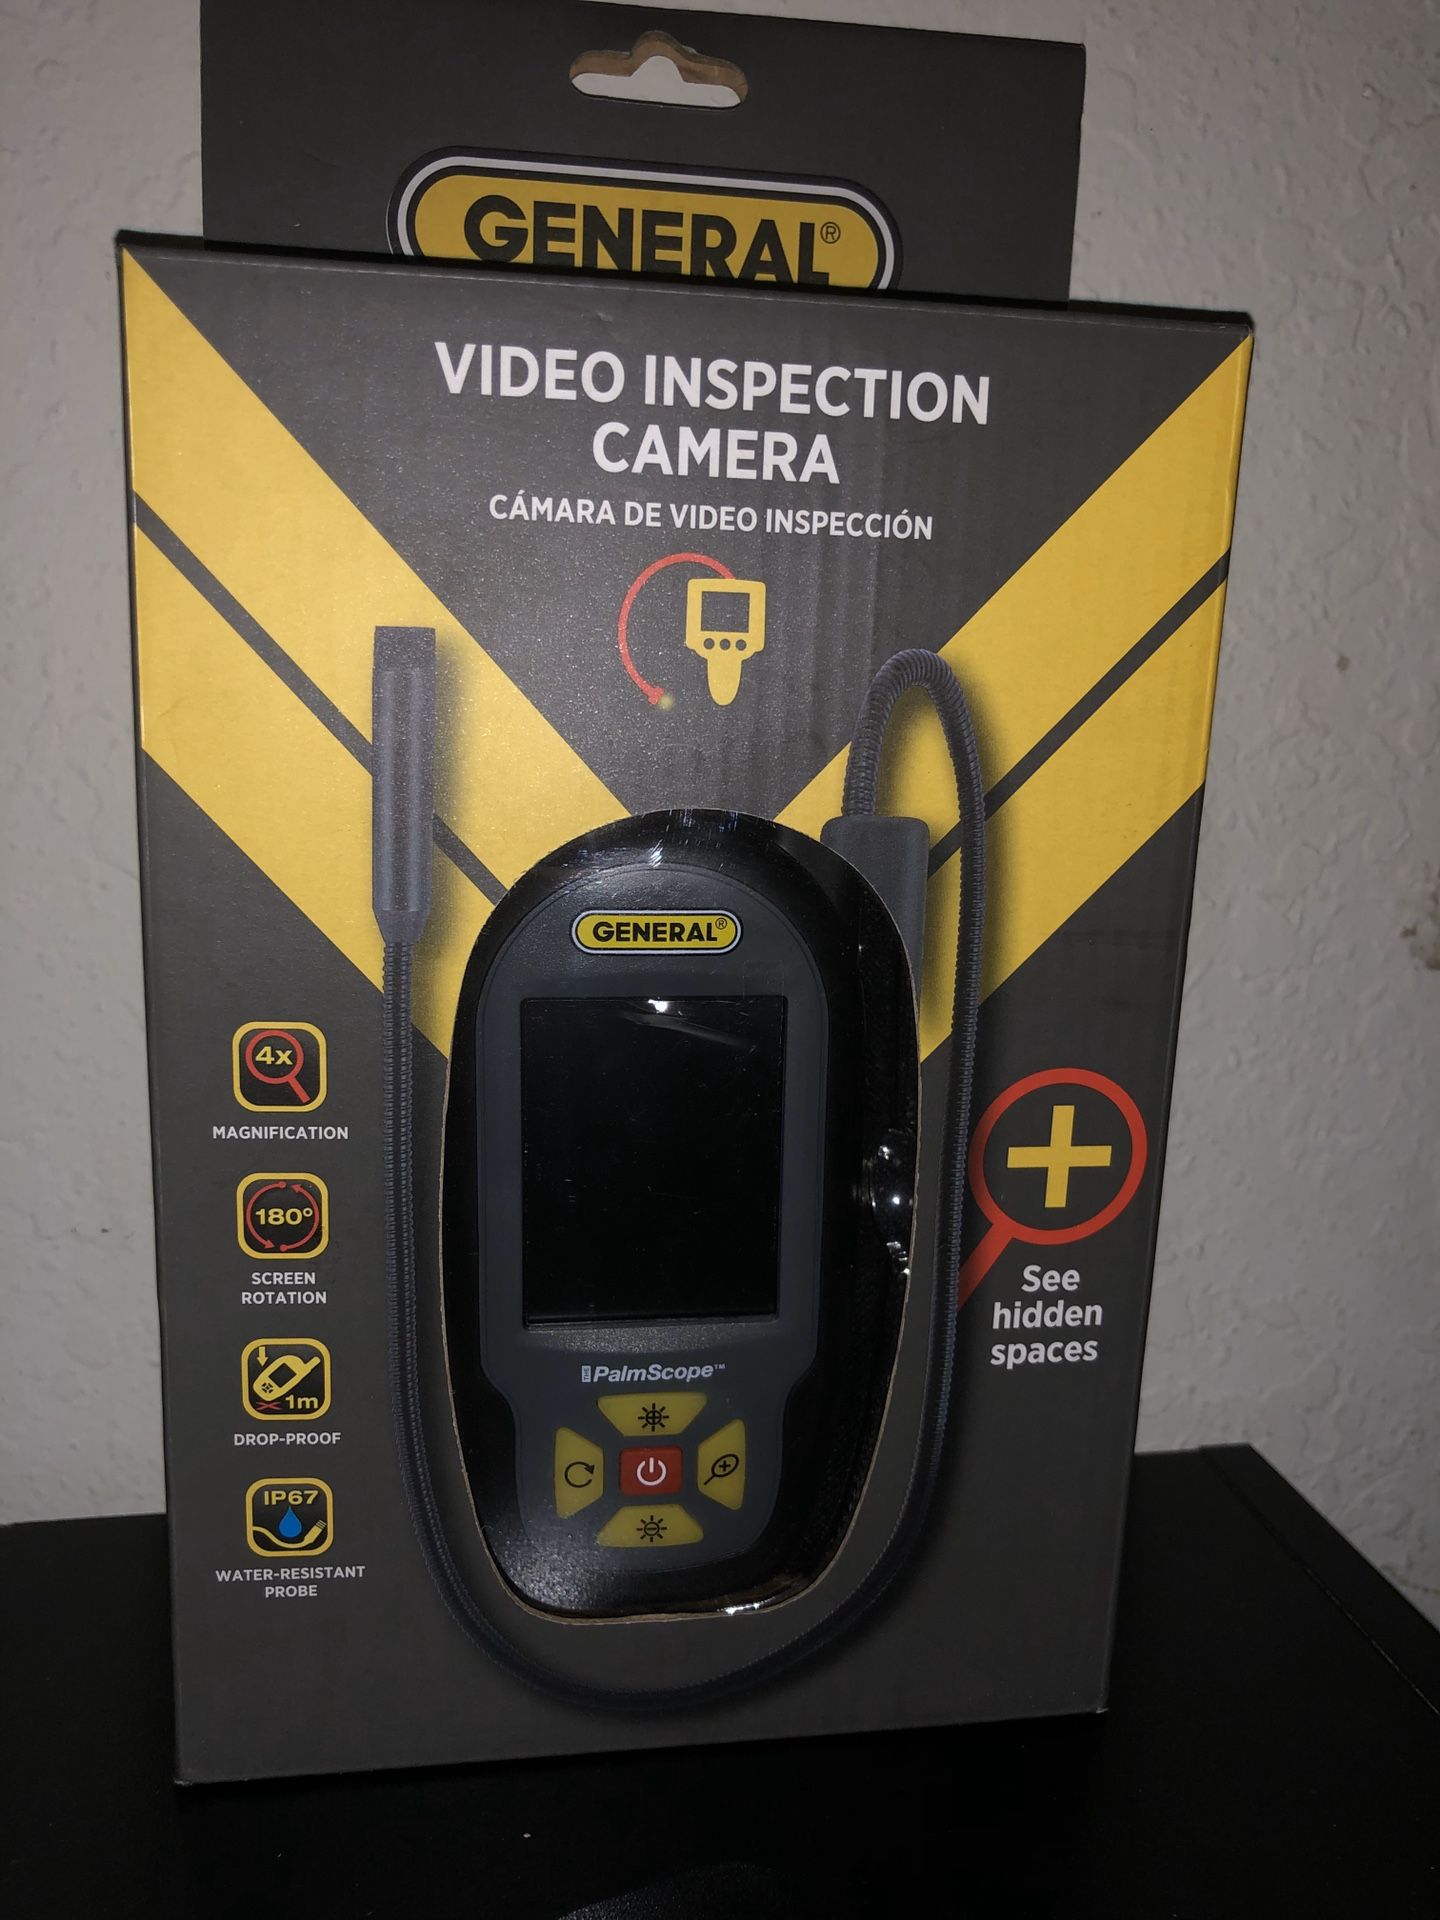 General video inspection camera